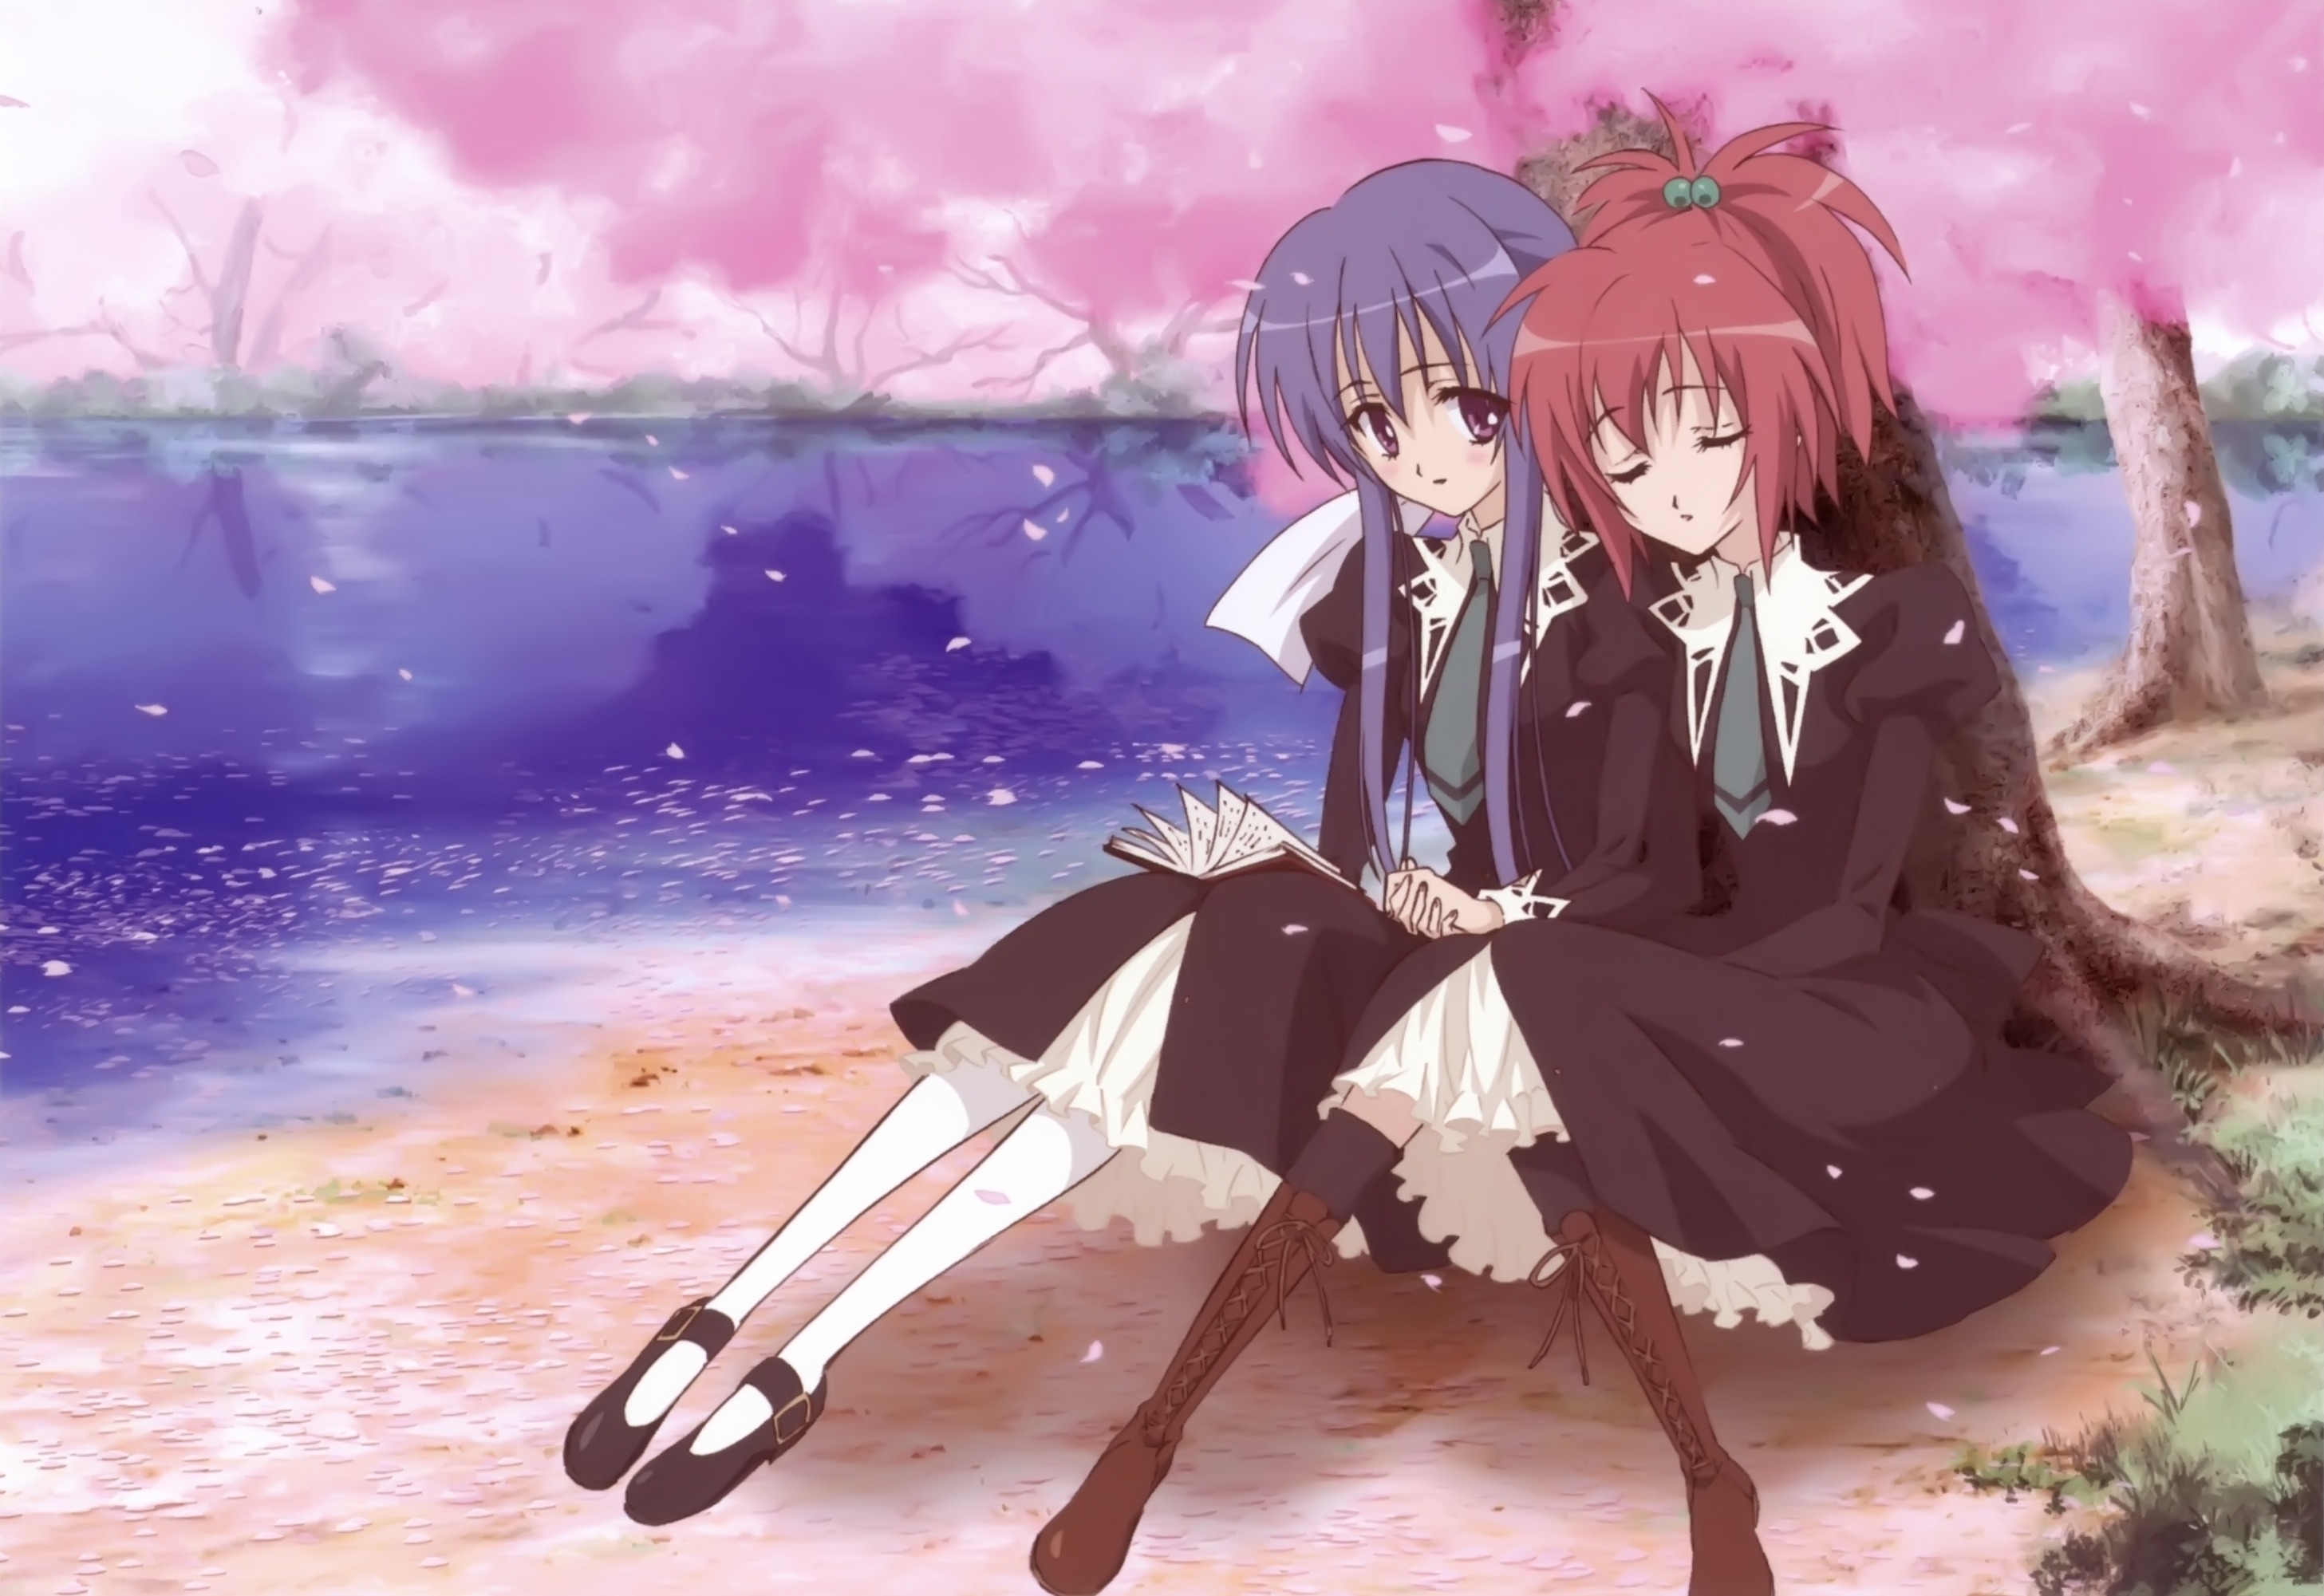 Strawberry panic hd papers and backgrounds